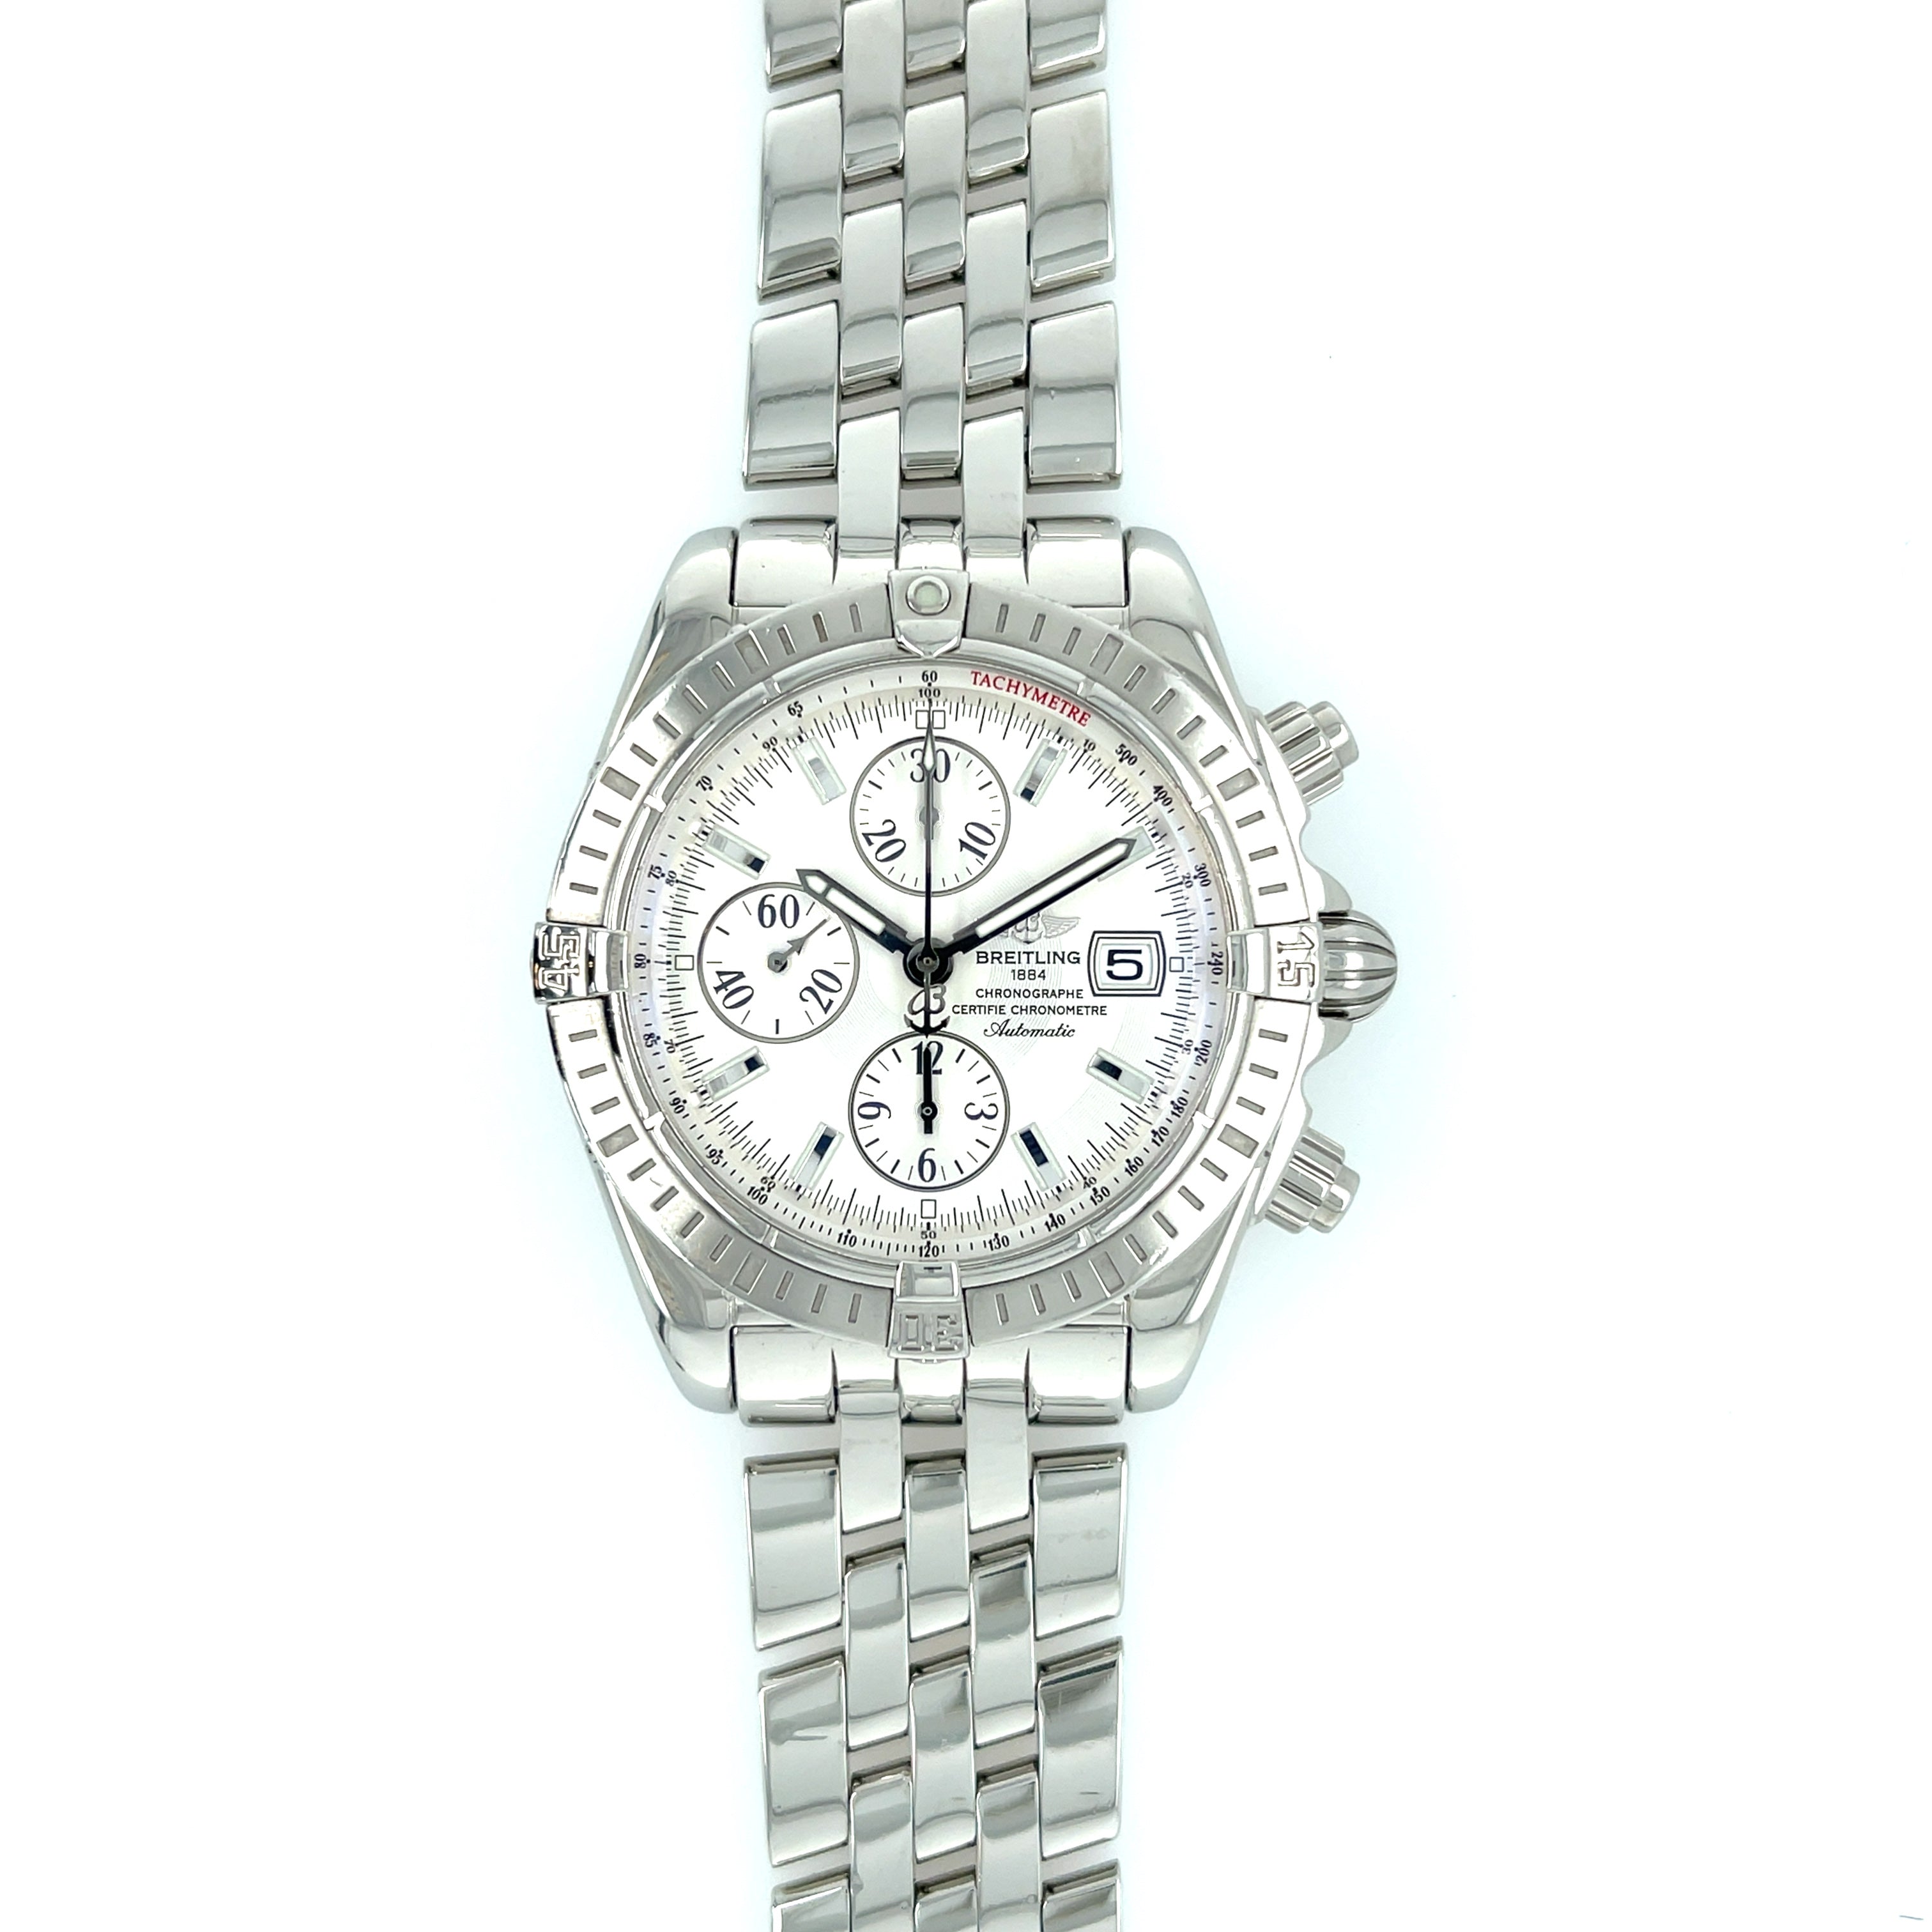 BREITLING Chronomat Evoloution A13356 Watch 2010 SOLD